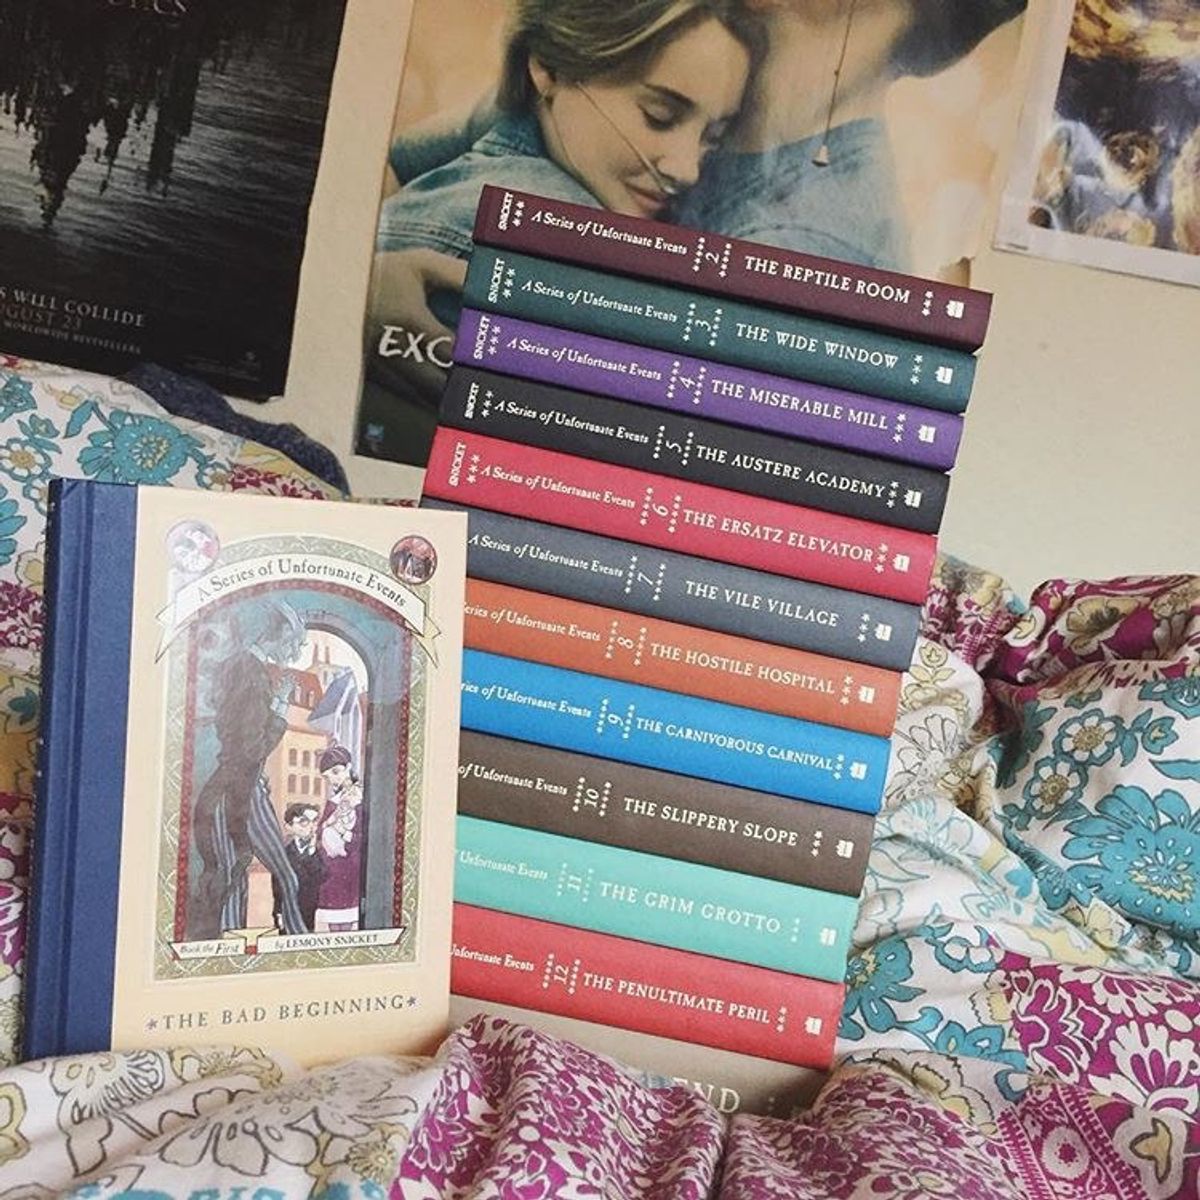 An Honest Review Of The Series Of Unfortunate Events